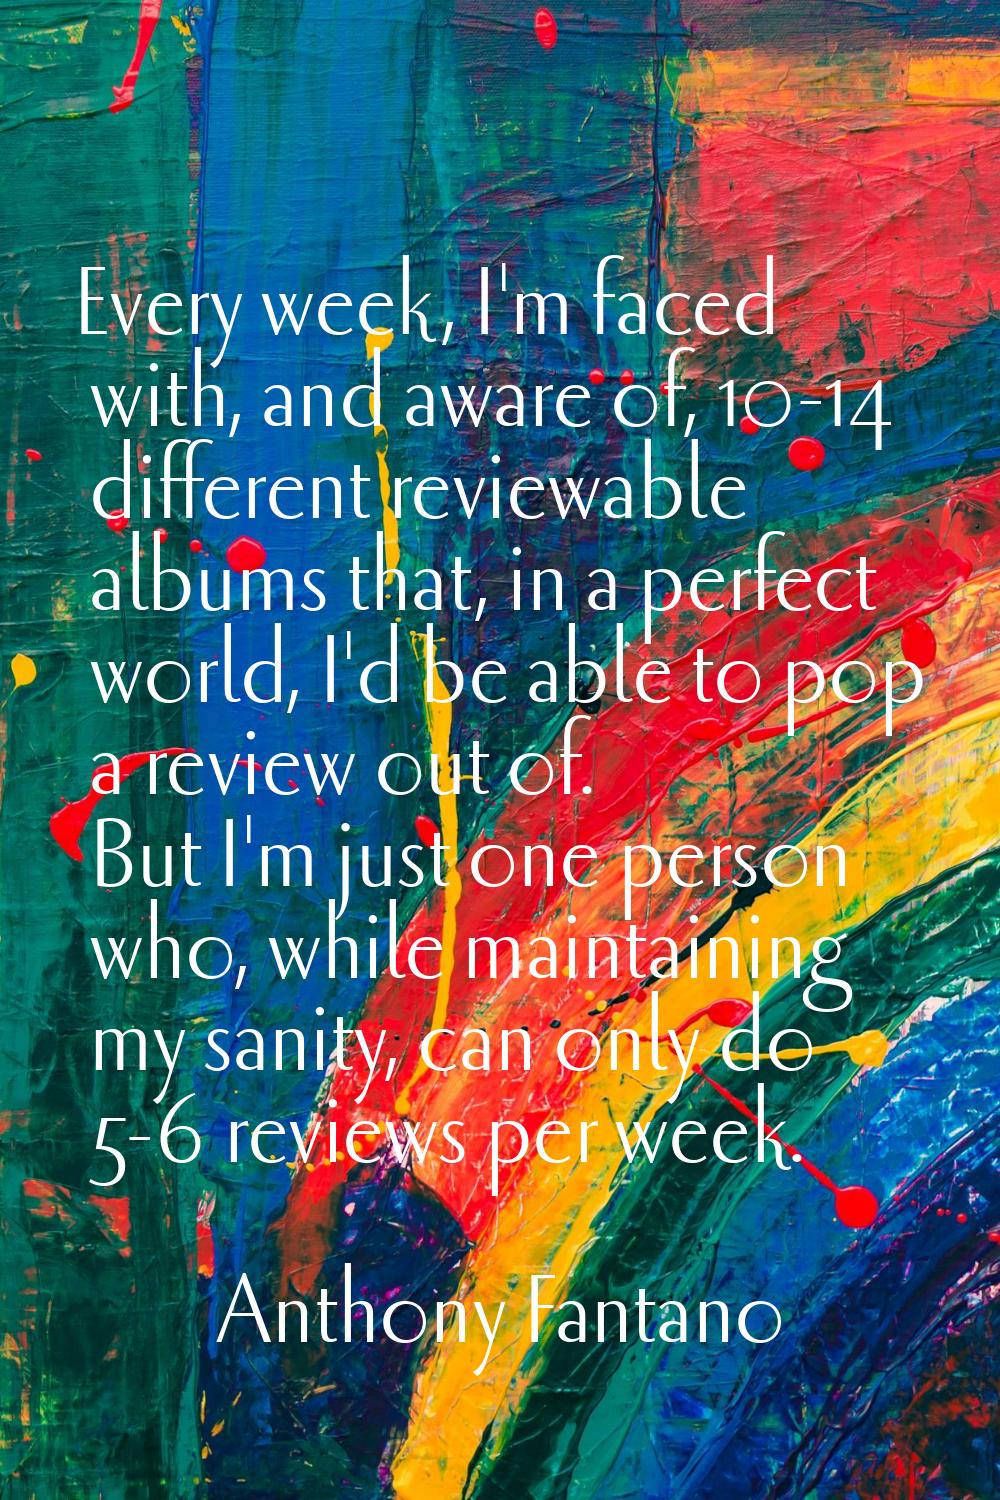 Every week, I'm faced with, and aware of, 10-14 different reviewable albums that, in a perfect worl